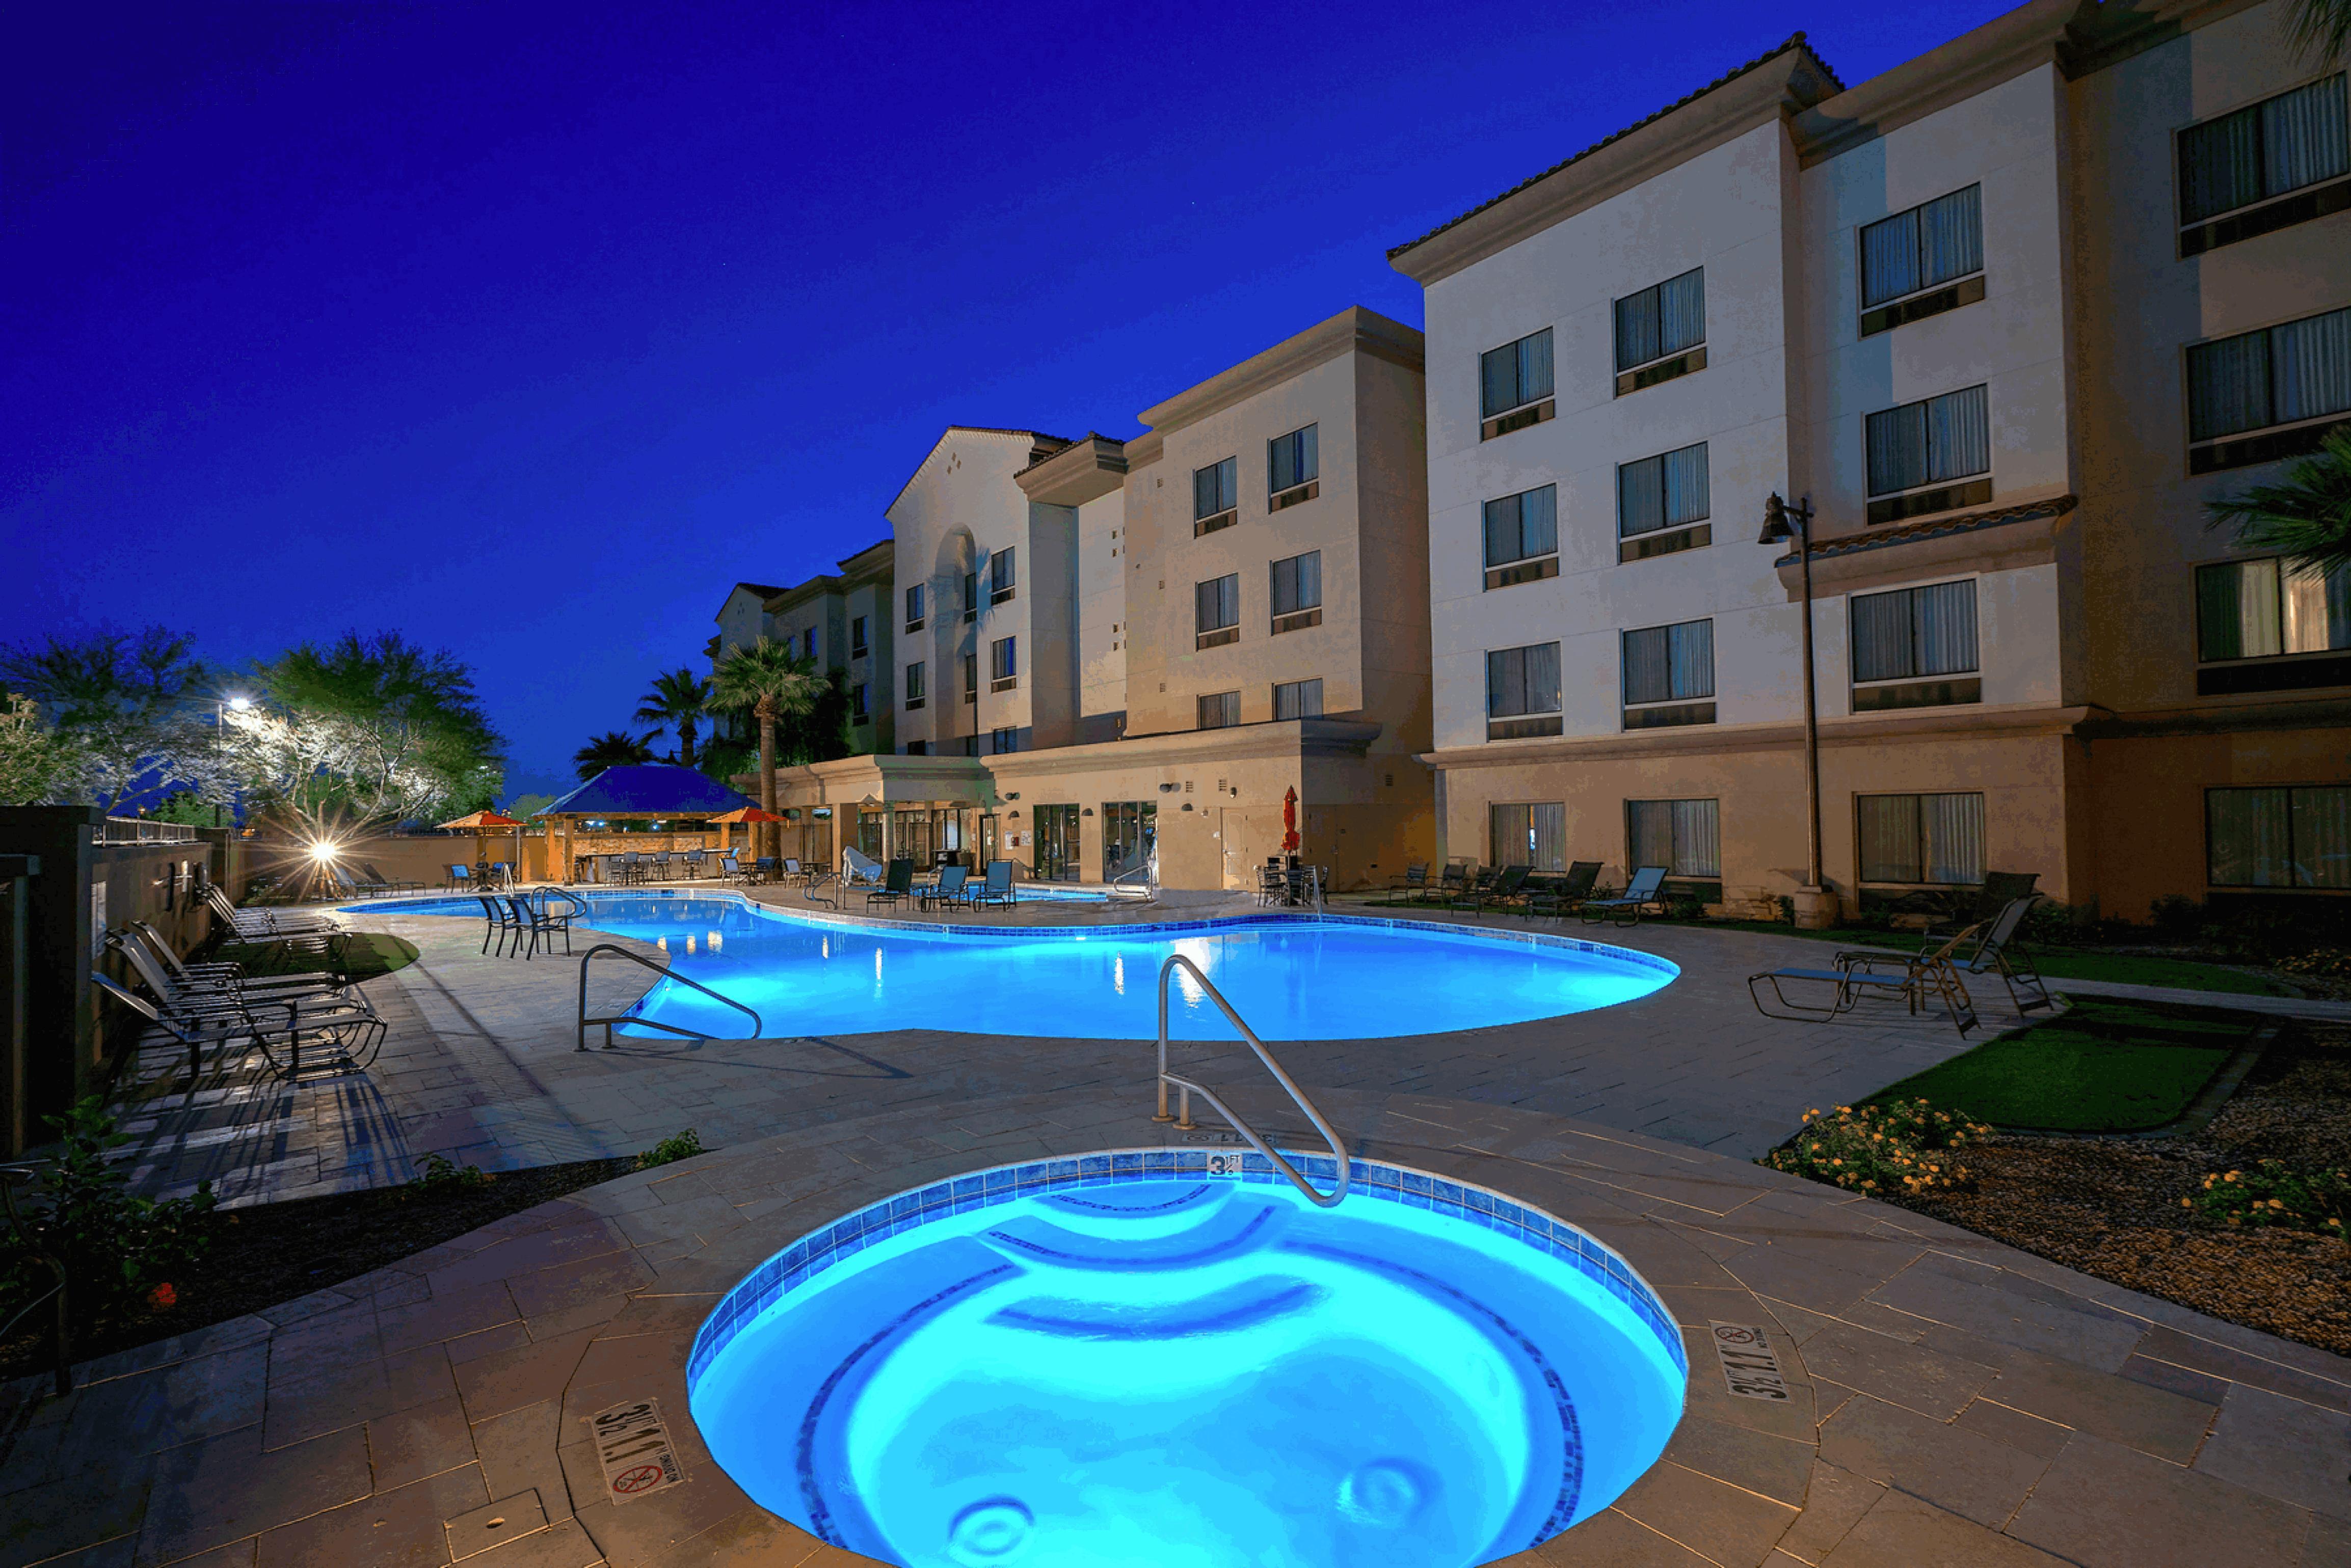 Nigh View of Outdoor Heated Pool and Hot Tub